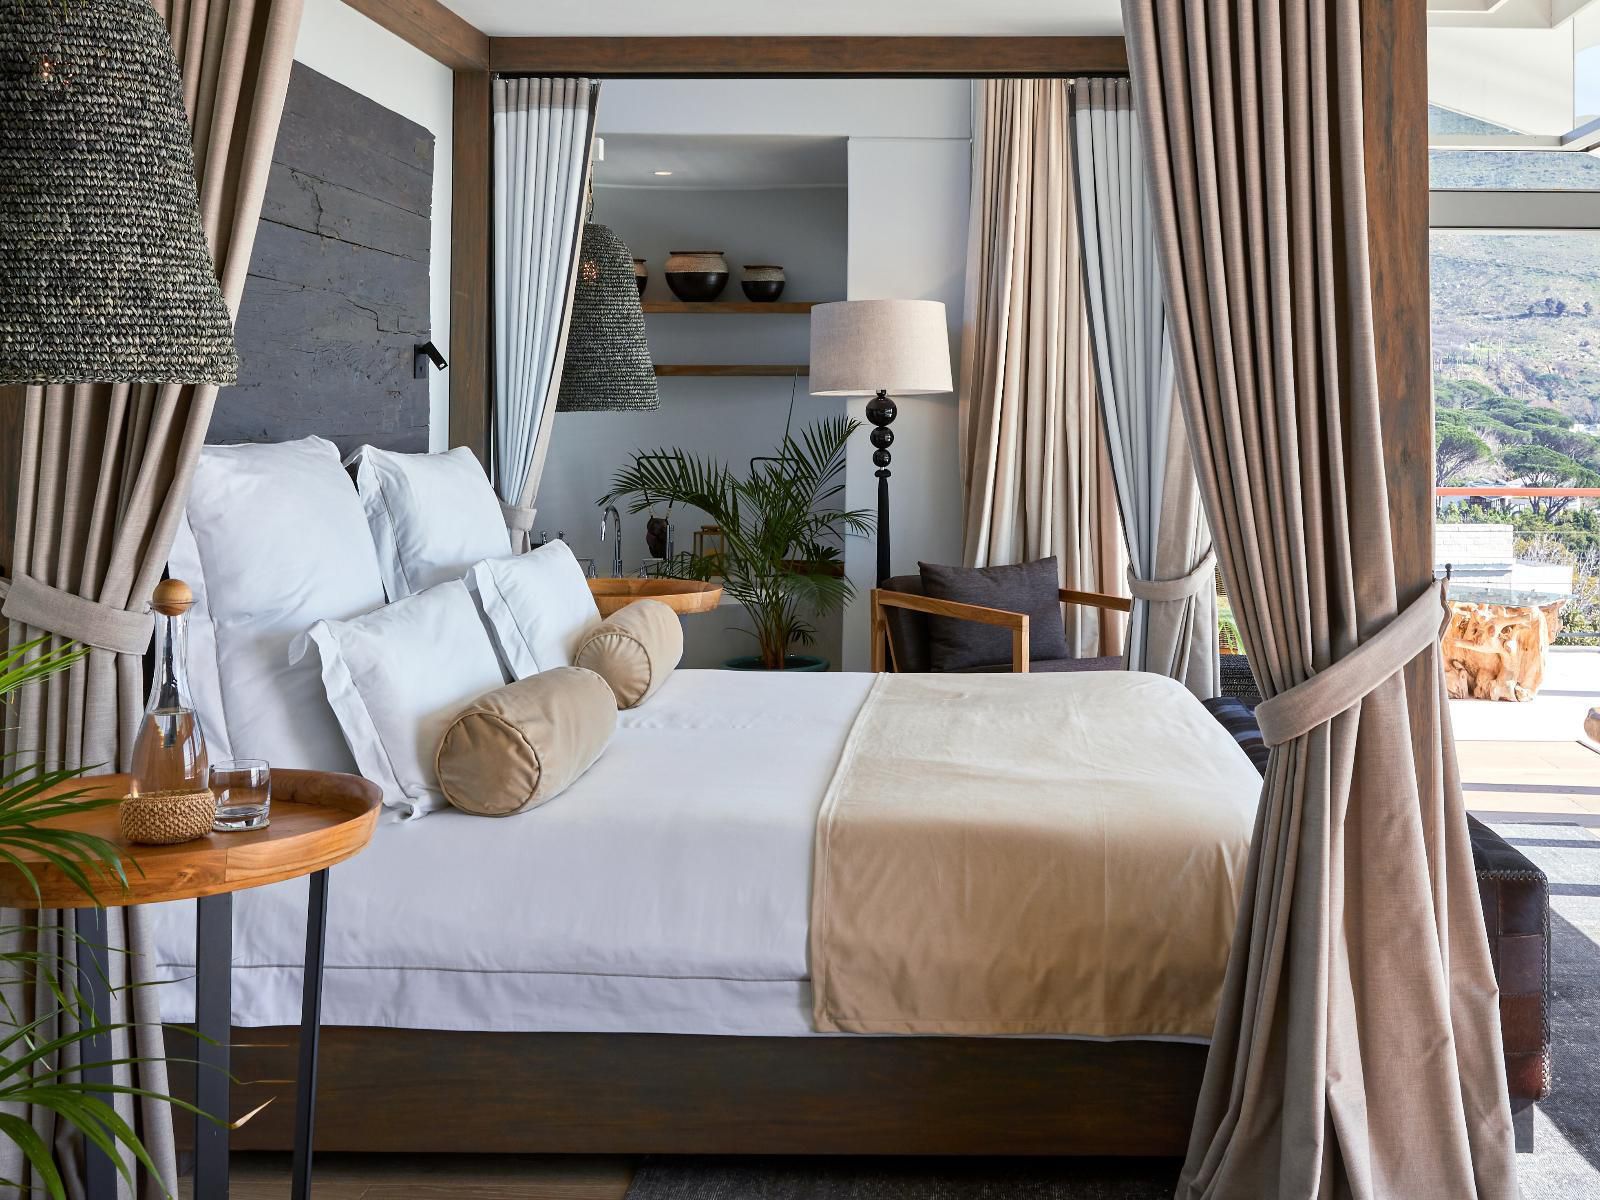 The Residence By Atzaro Cape Town Oranjezicht Cape Town Western Cape South Africa Bedroom